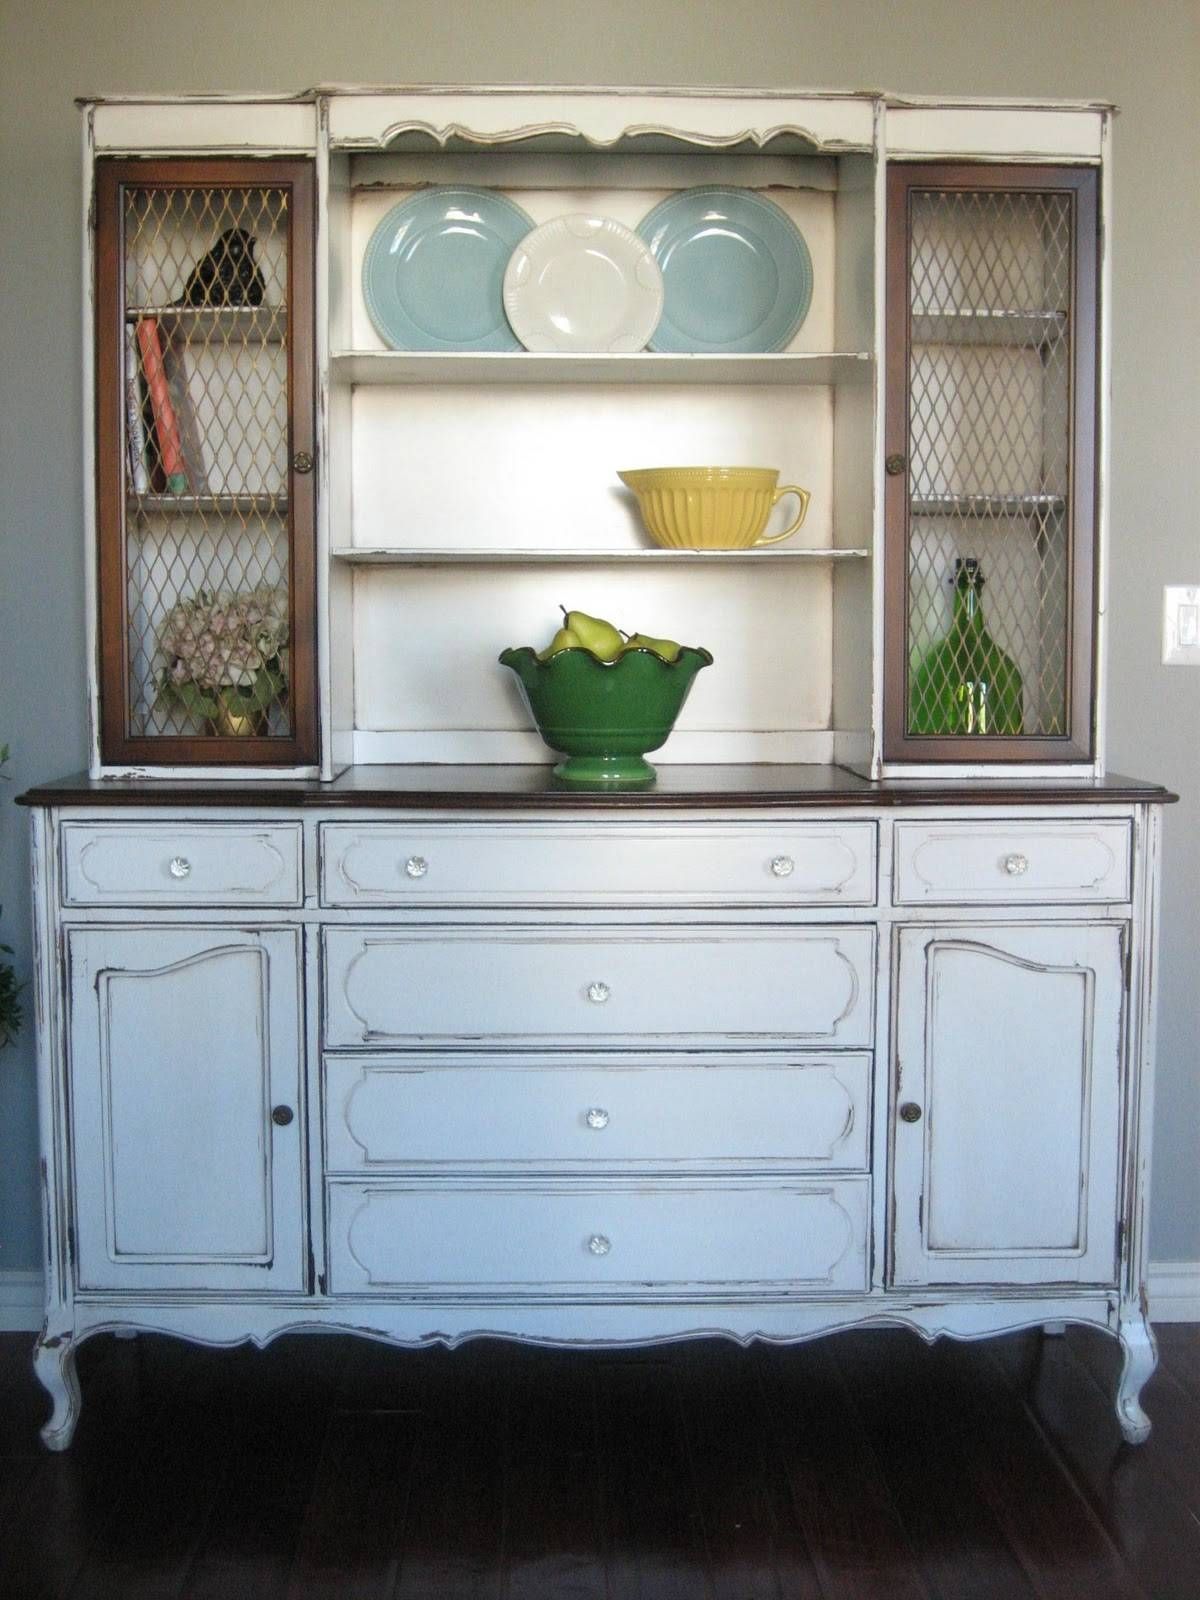 European Paint Finishes: ~ Rustic French Farmhouse Hutch ~ Intended For French Sideboard Cabinets (View 11 of 15)